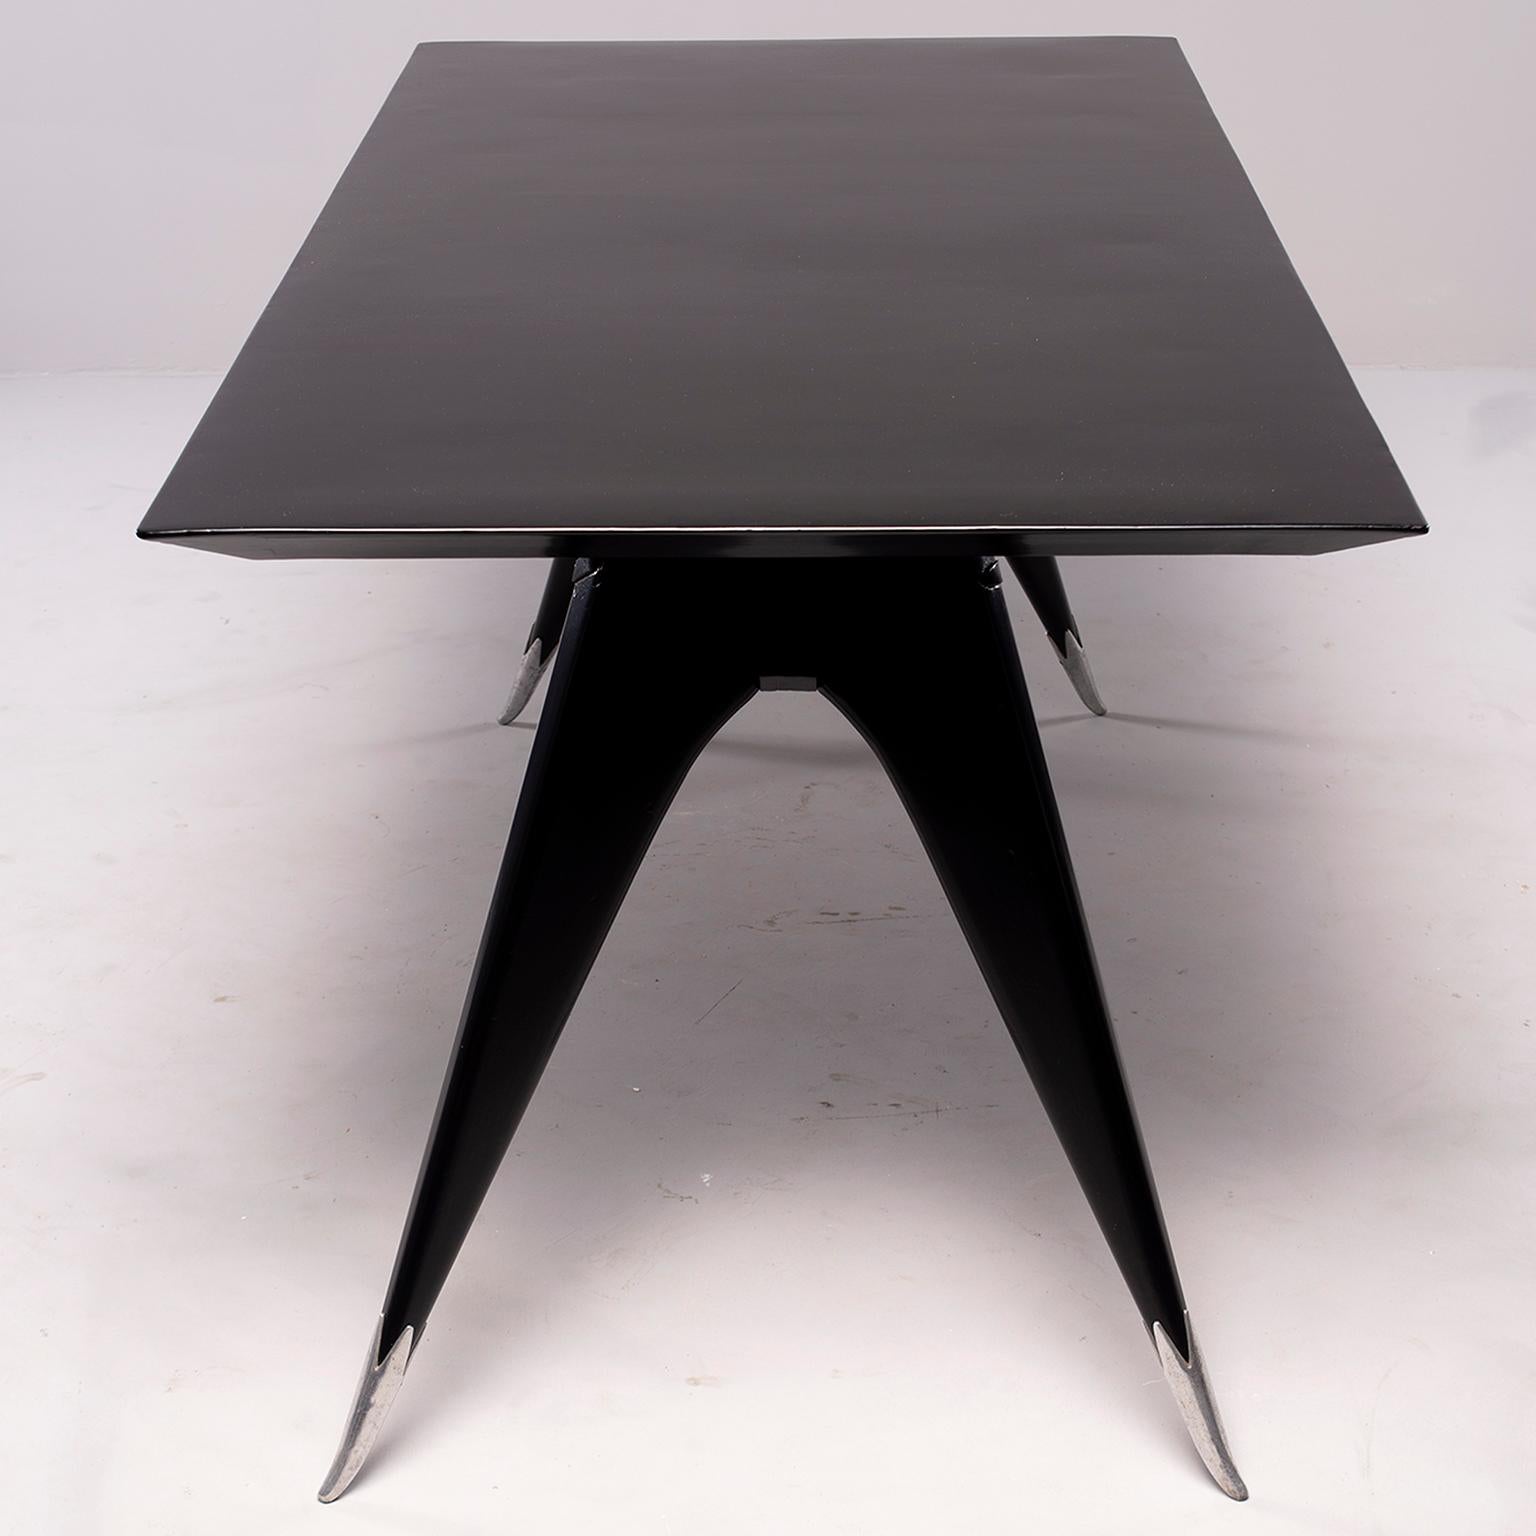 Mid-Century Modern Midcentury Italian Ebonized Dining Table with Tapered Legs and Silver Leg Caps